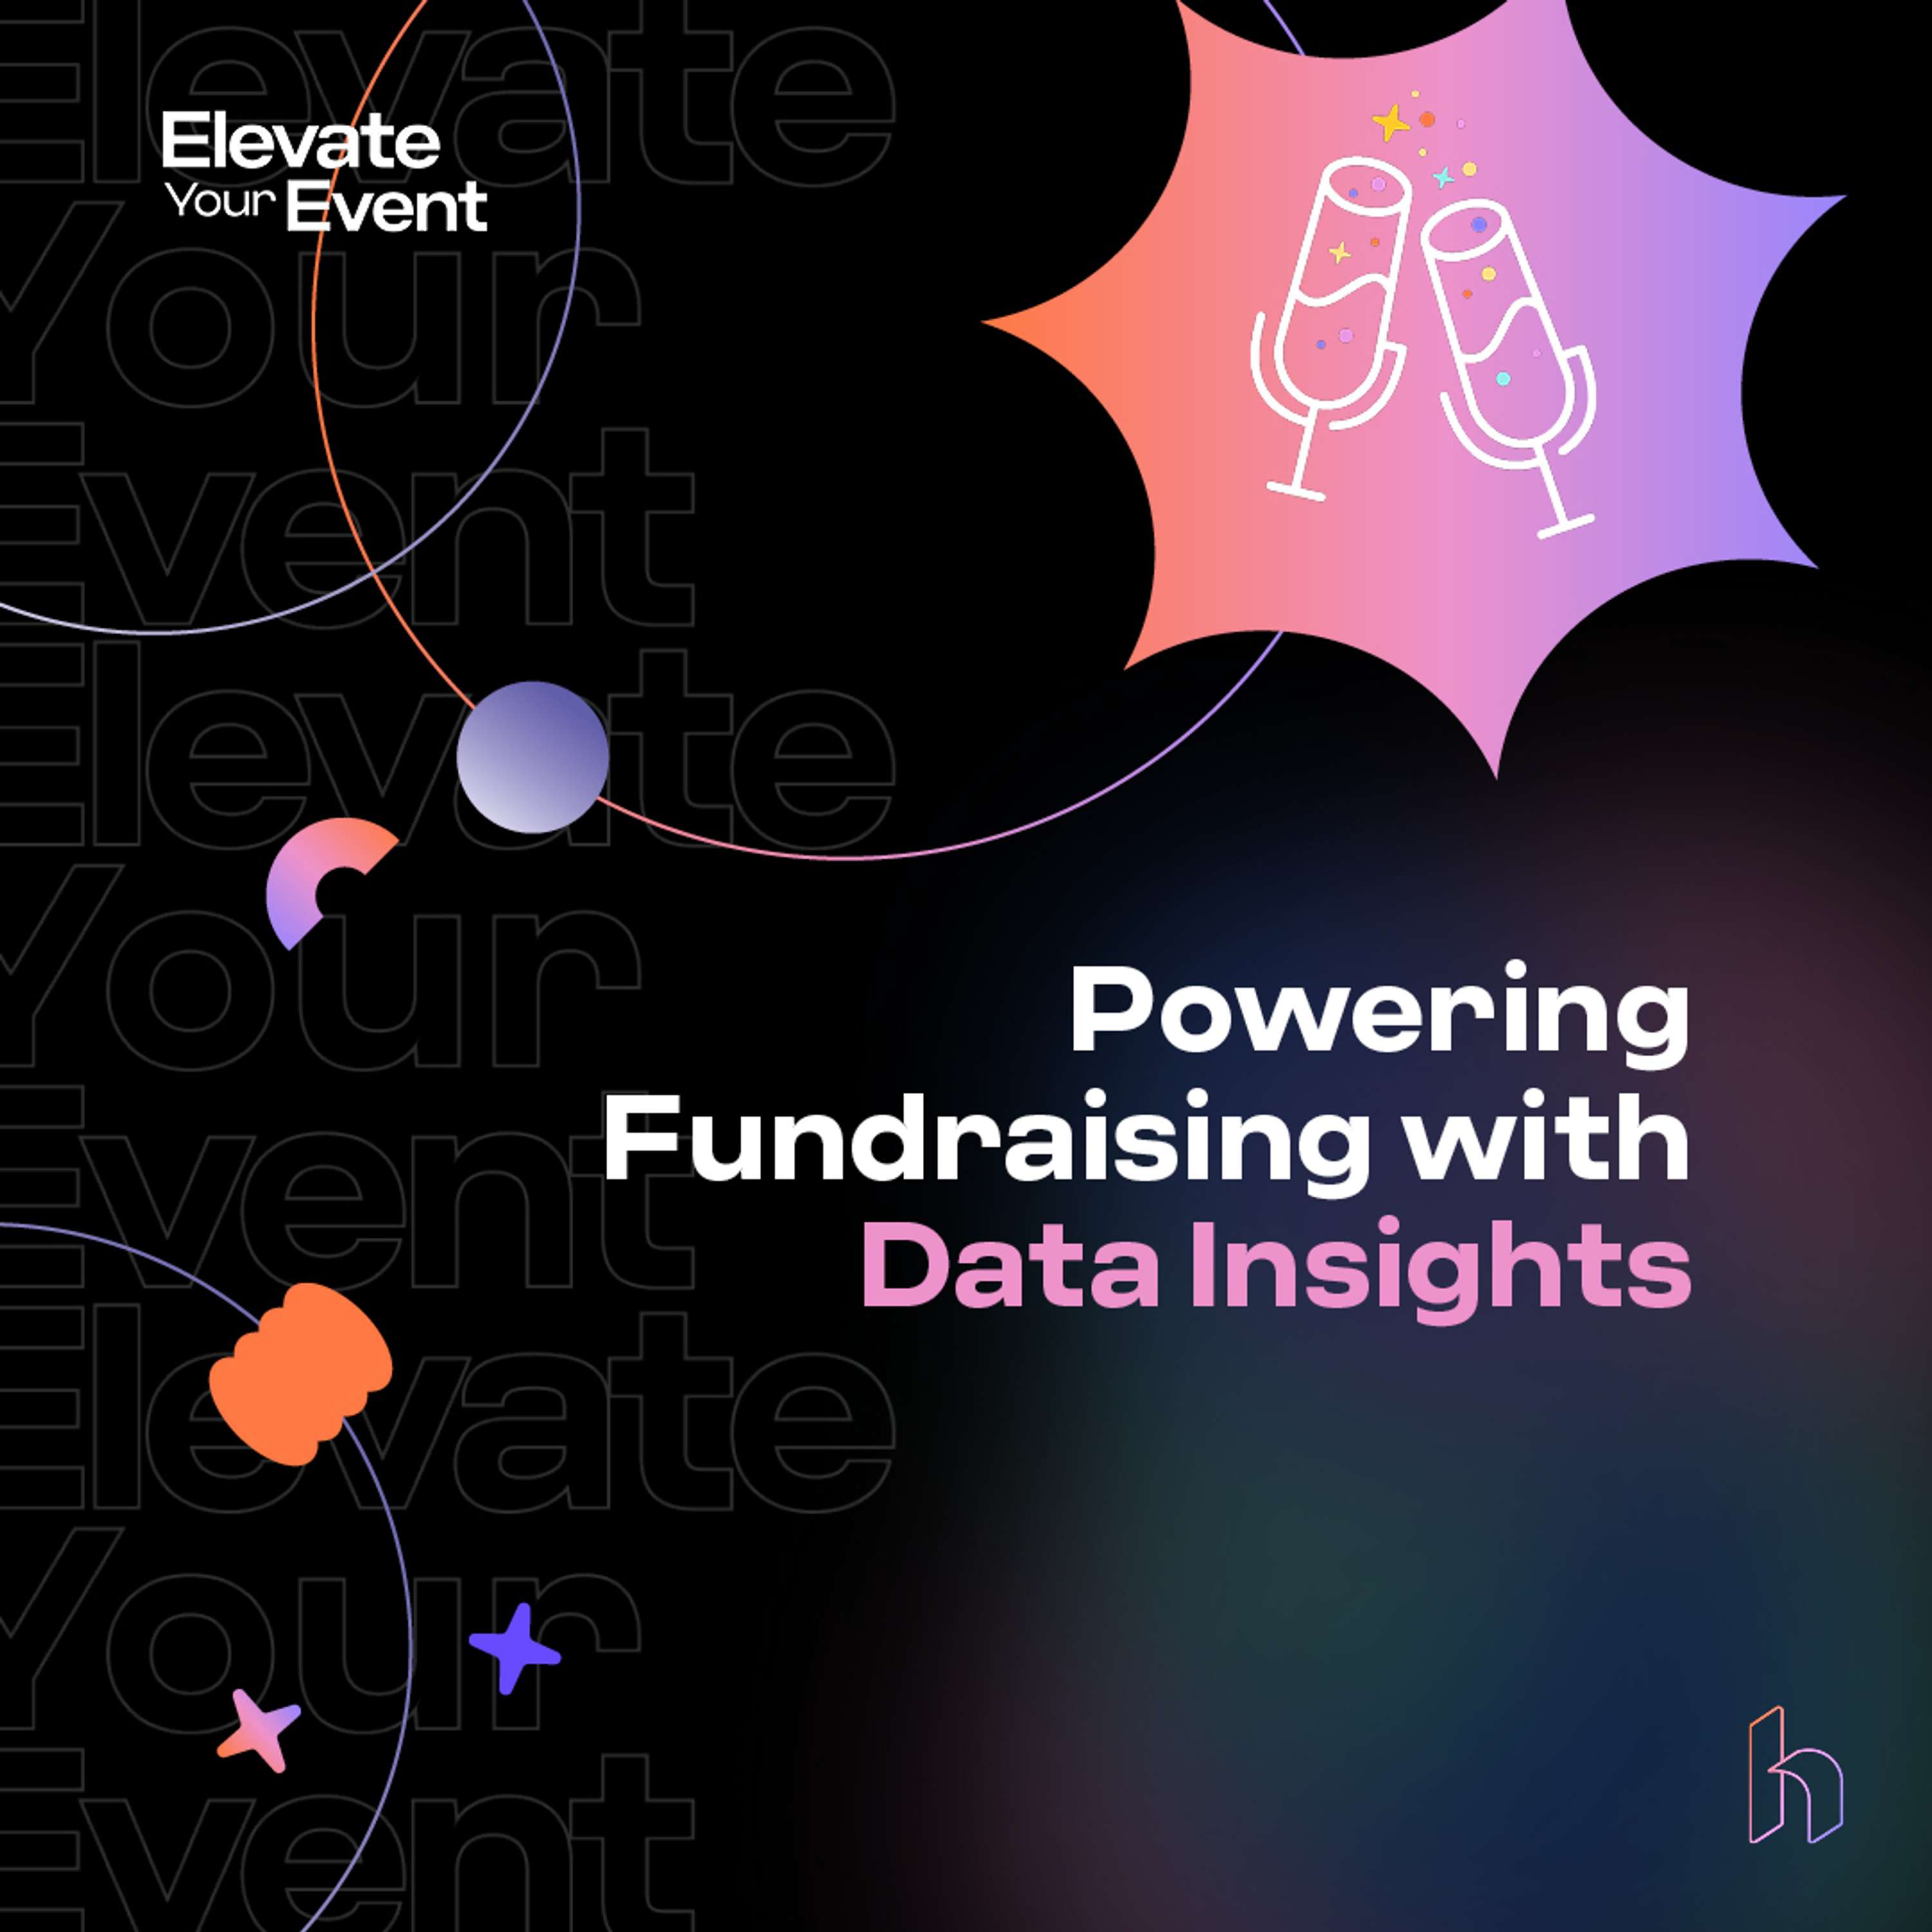 Powering Fundraising with Data Insights